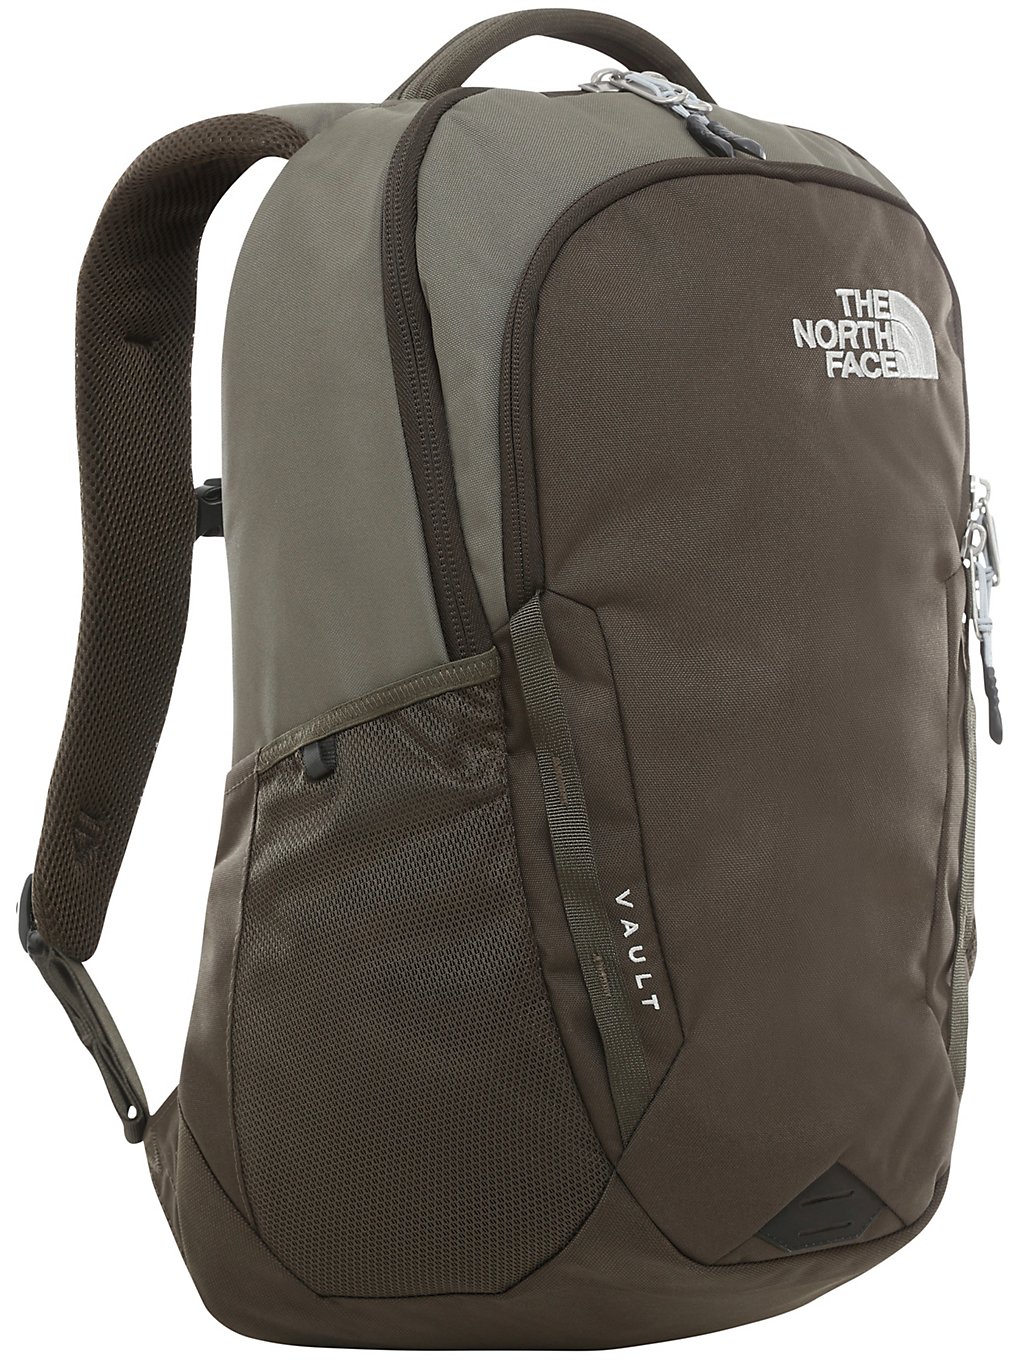 The north face vault backpack vihreä, the north face